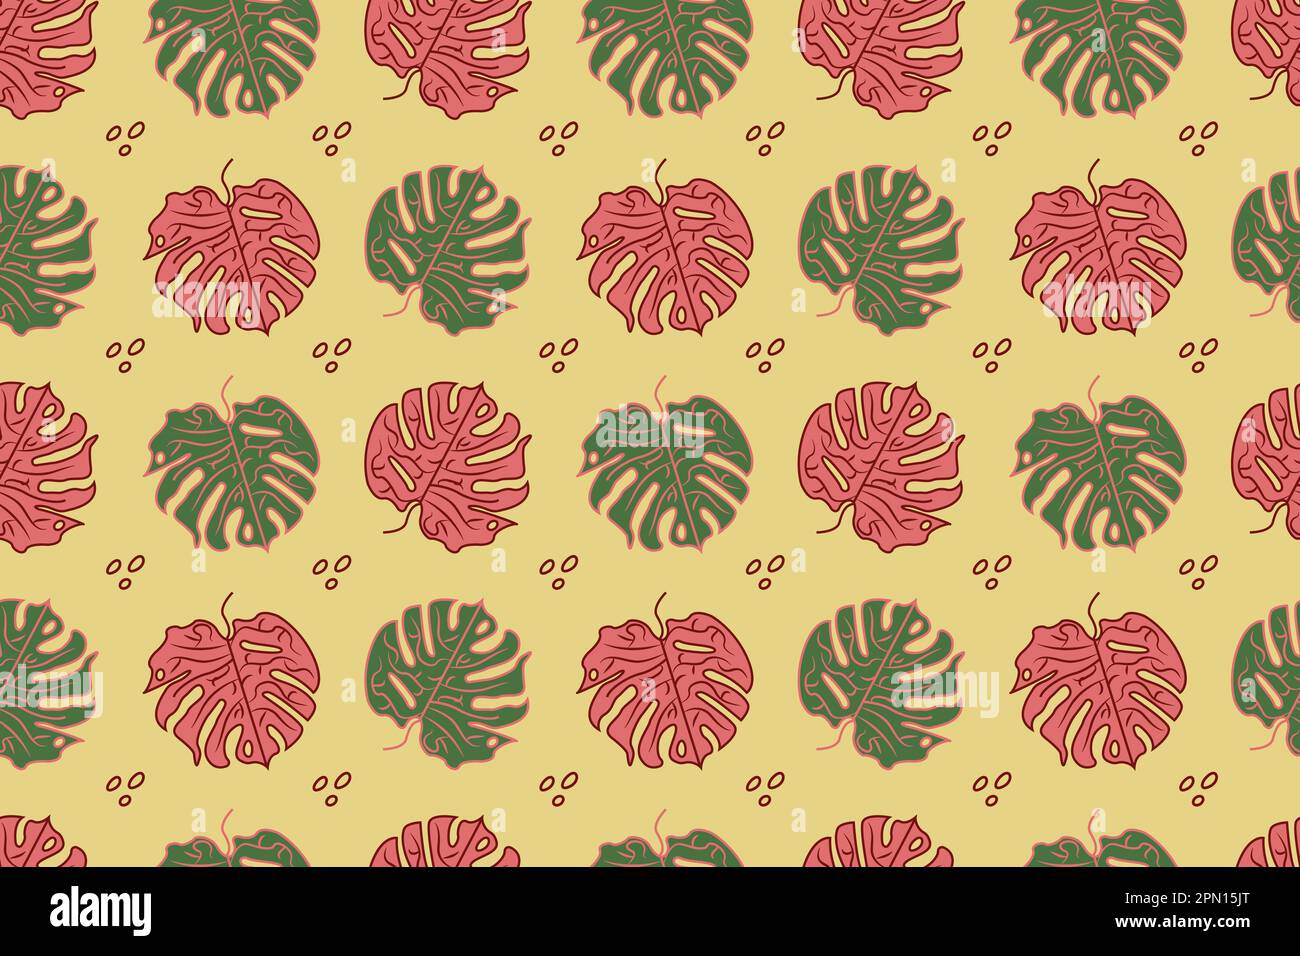 Luxury Nature yellow background vector. Seamless pattern of hand drawn sketch tropical palm leaves. wallpaper, invitation, fabric and paper works. Spanish style vector illustration Stock Vector